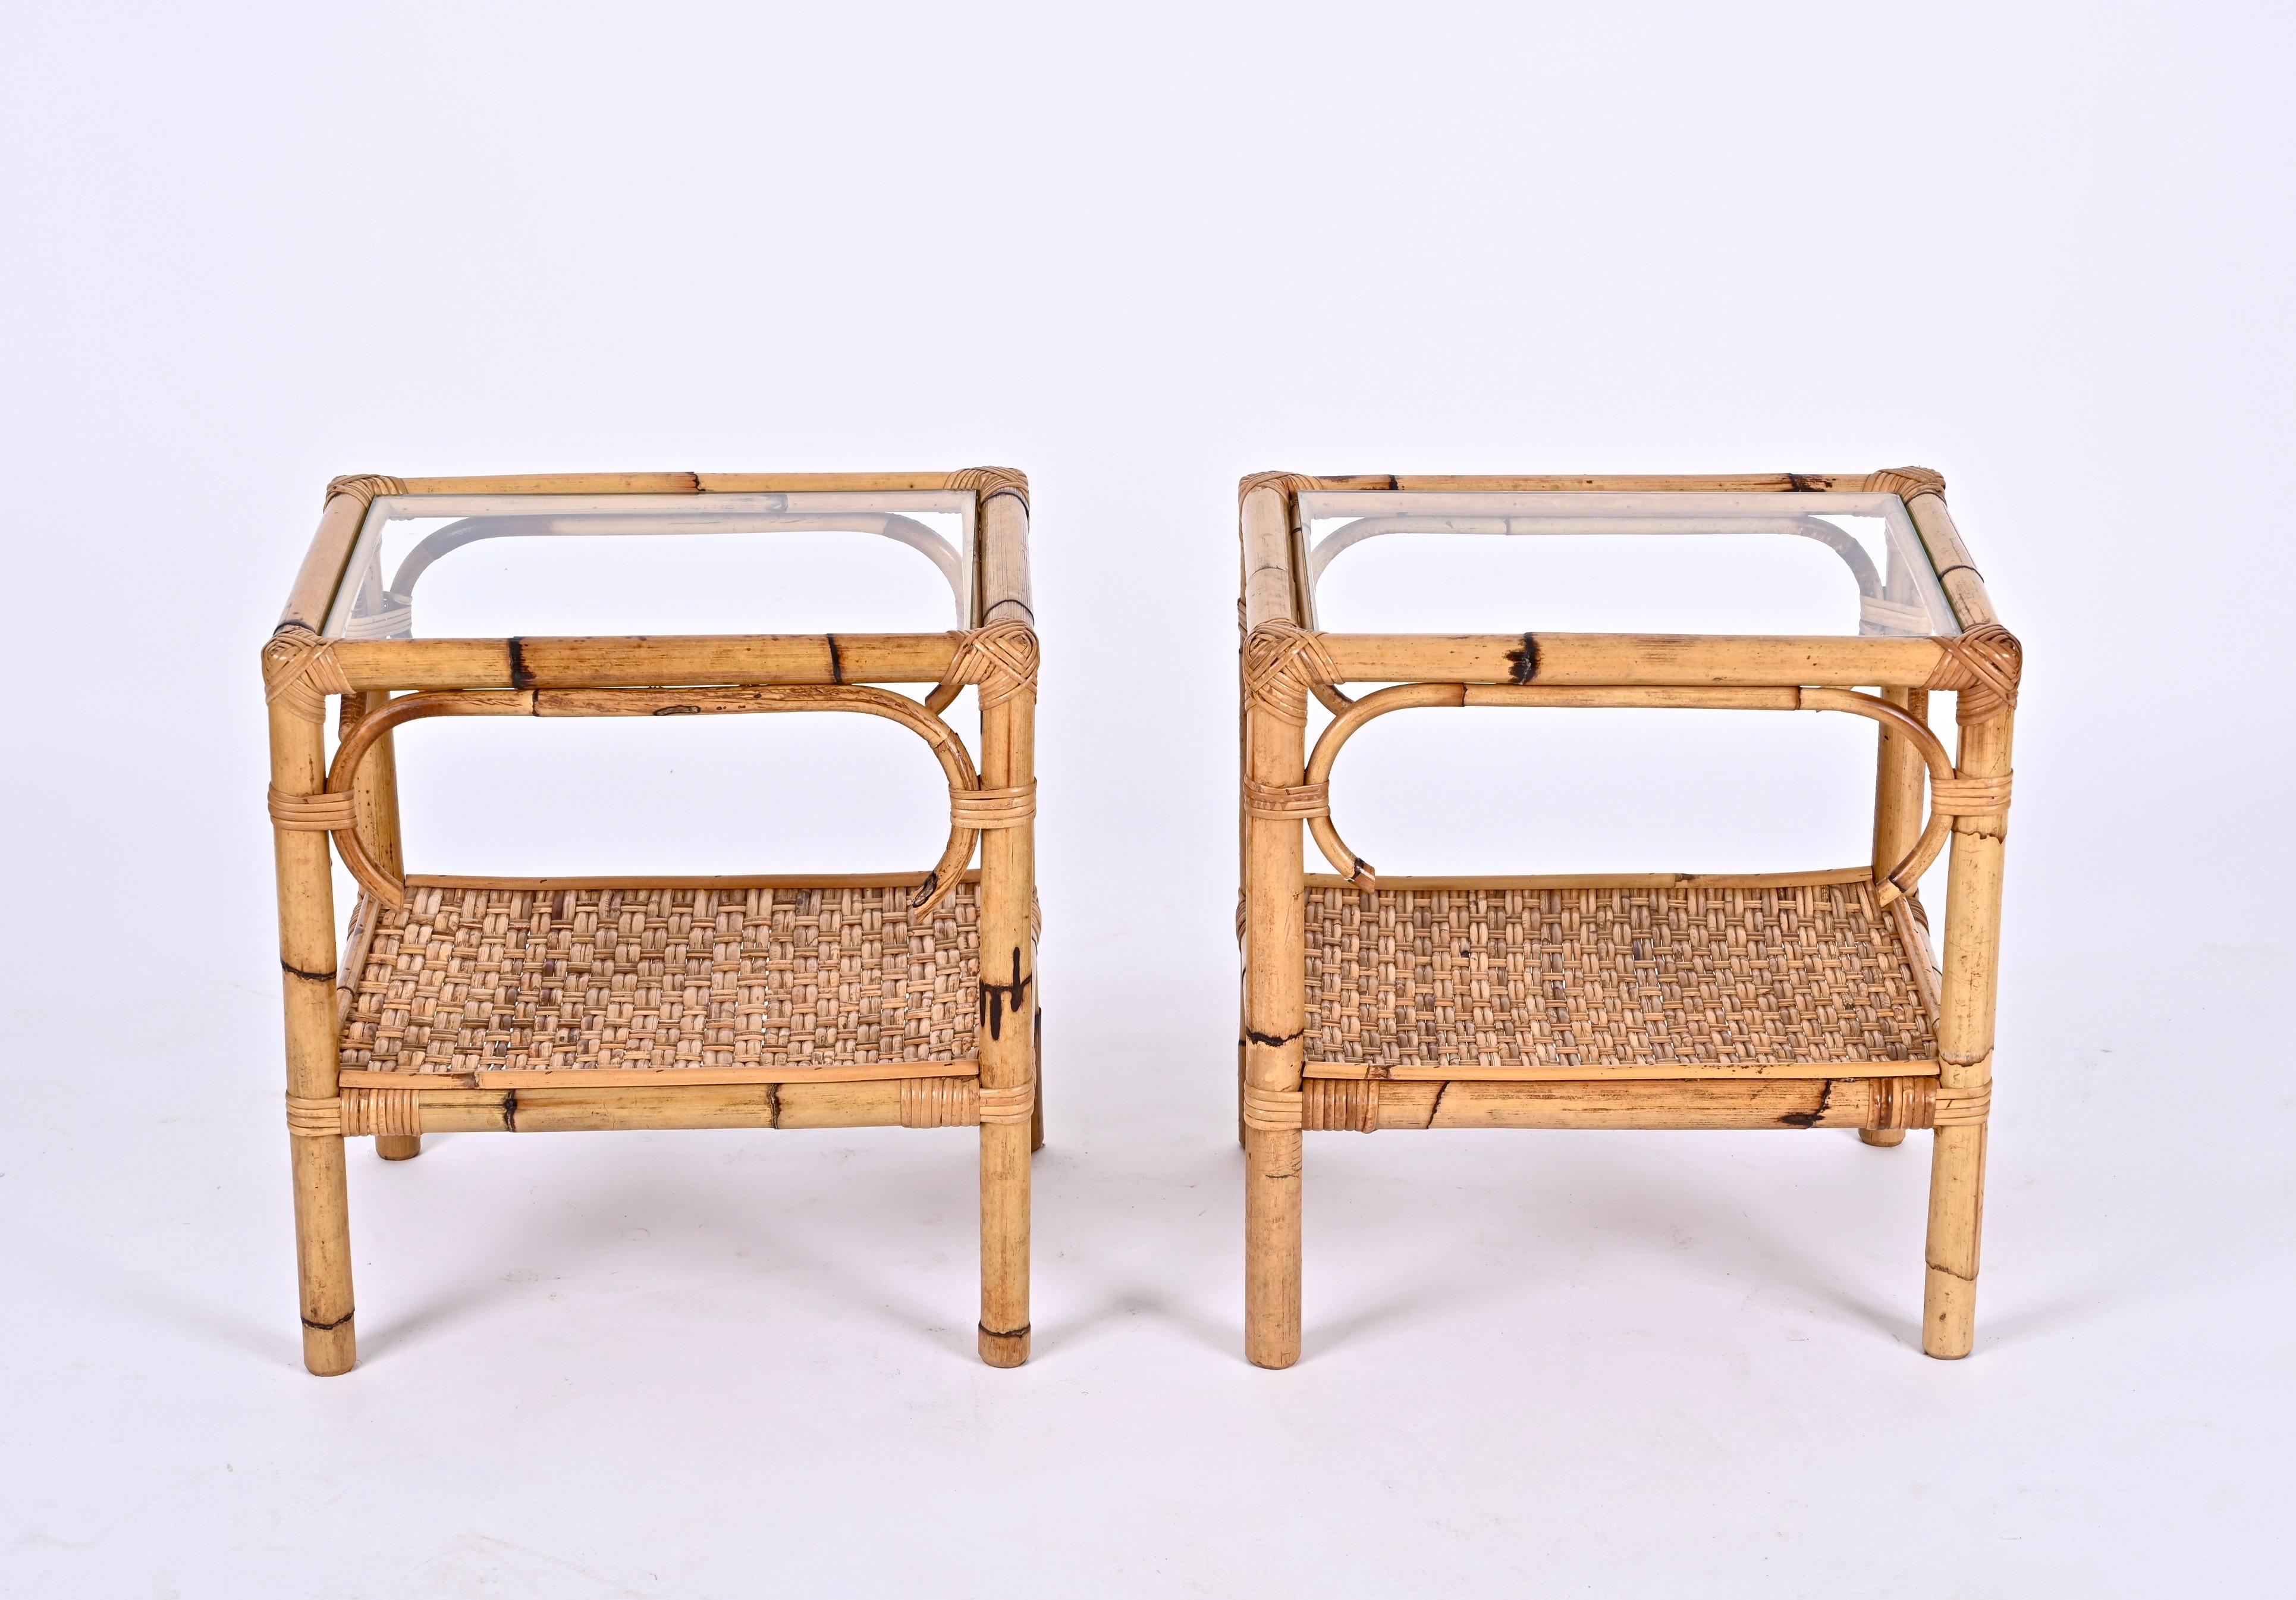 Amazing Pair of Mid-Century Modern Bamboo and Rattan Nightstands, designed in Italy in the 70's.
These stunning bedsides  feature a structure made in bamboo and enriched by rattan and wicker decorations on each side and a glass top.

These small